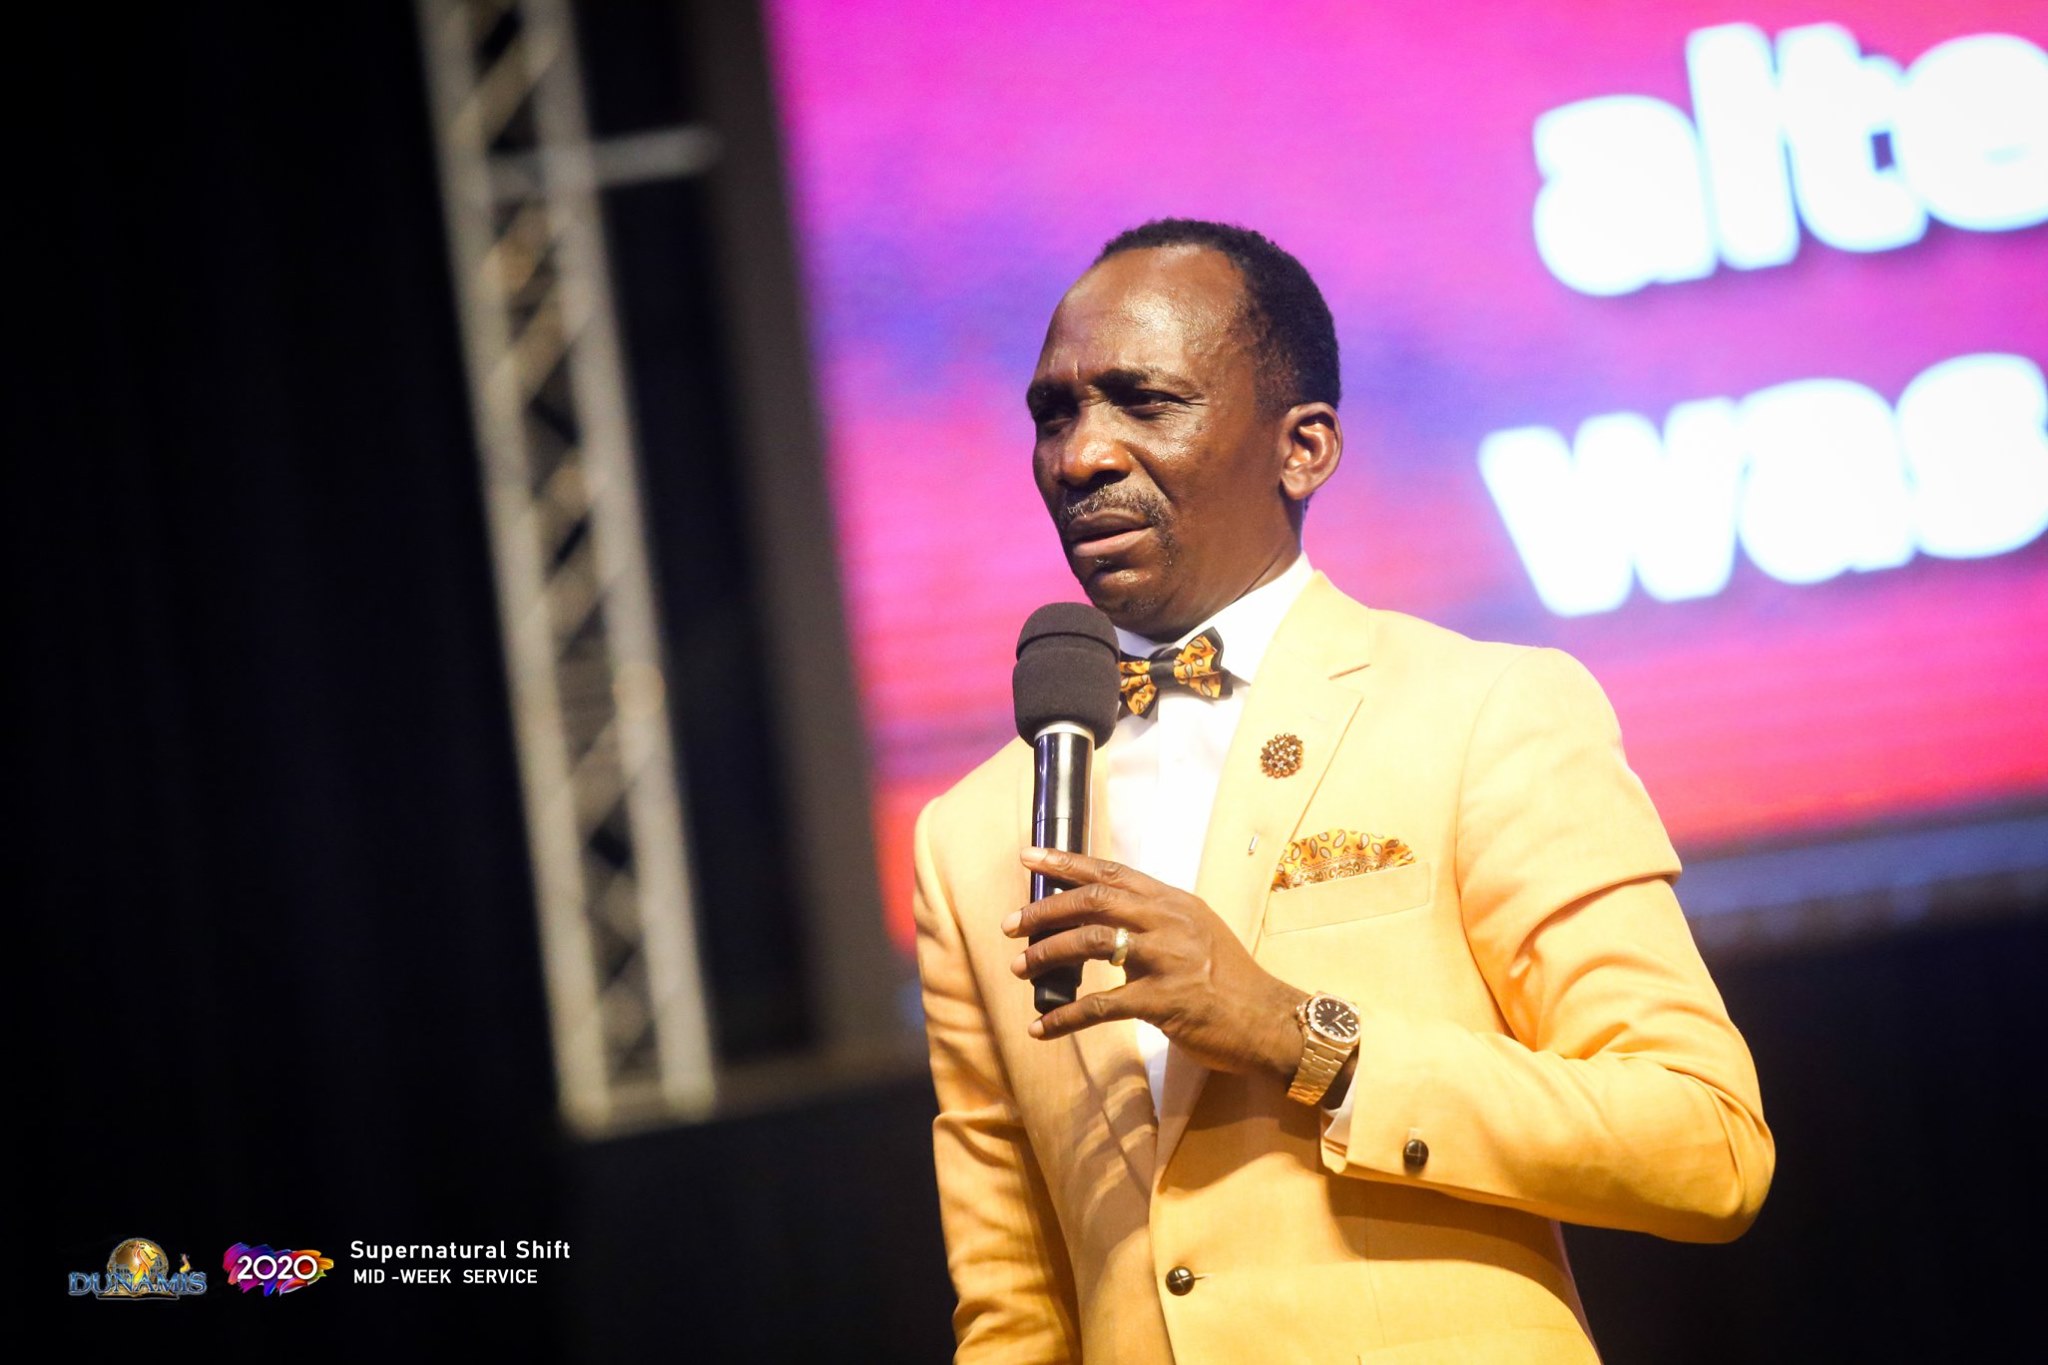 July 2020 Power Communion Service Message by Dr. Paul Enenche